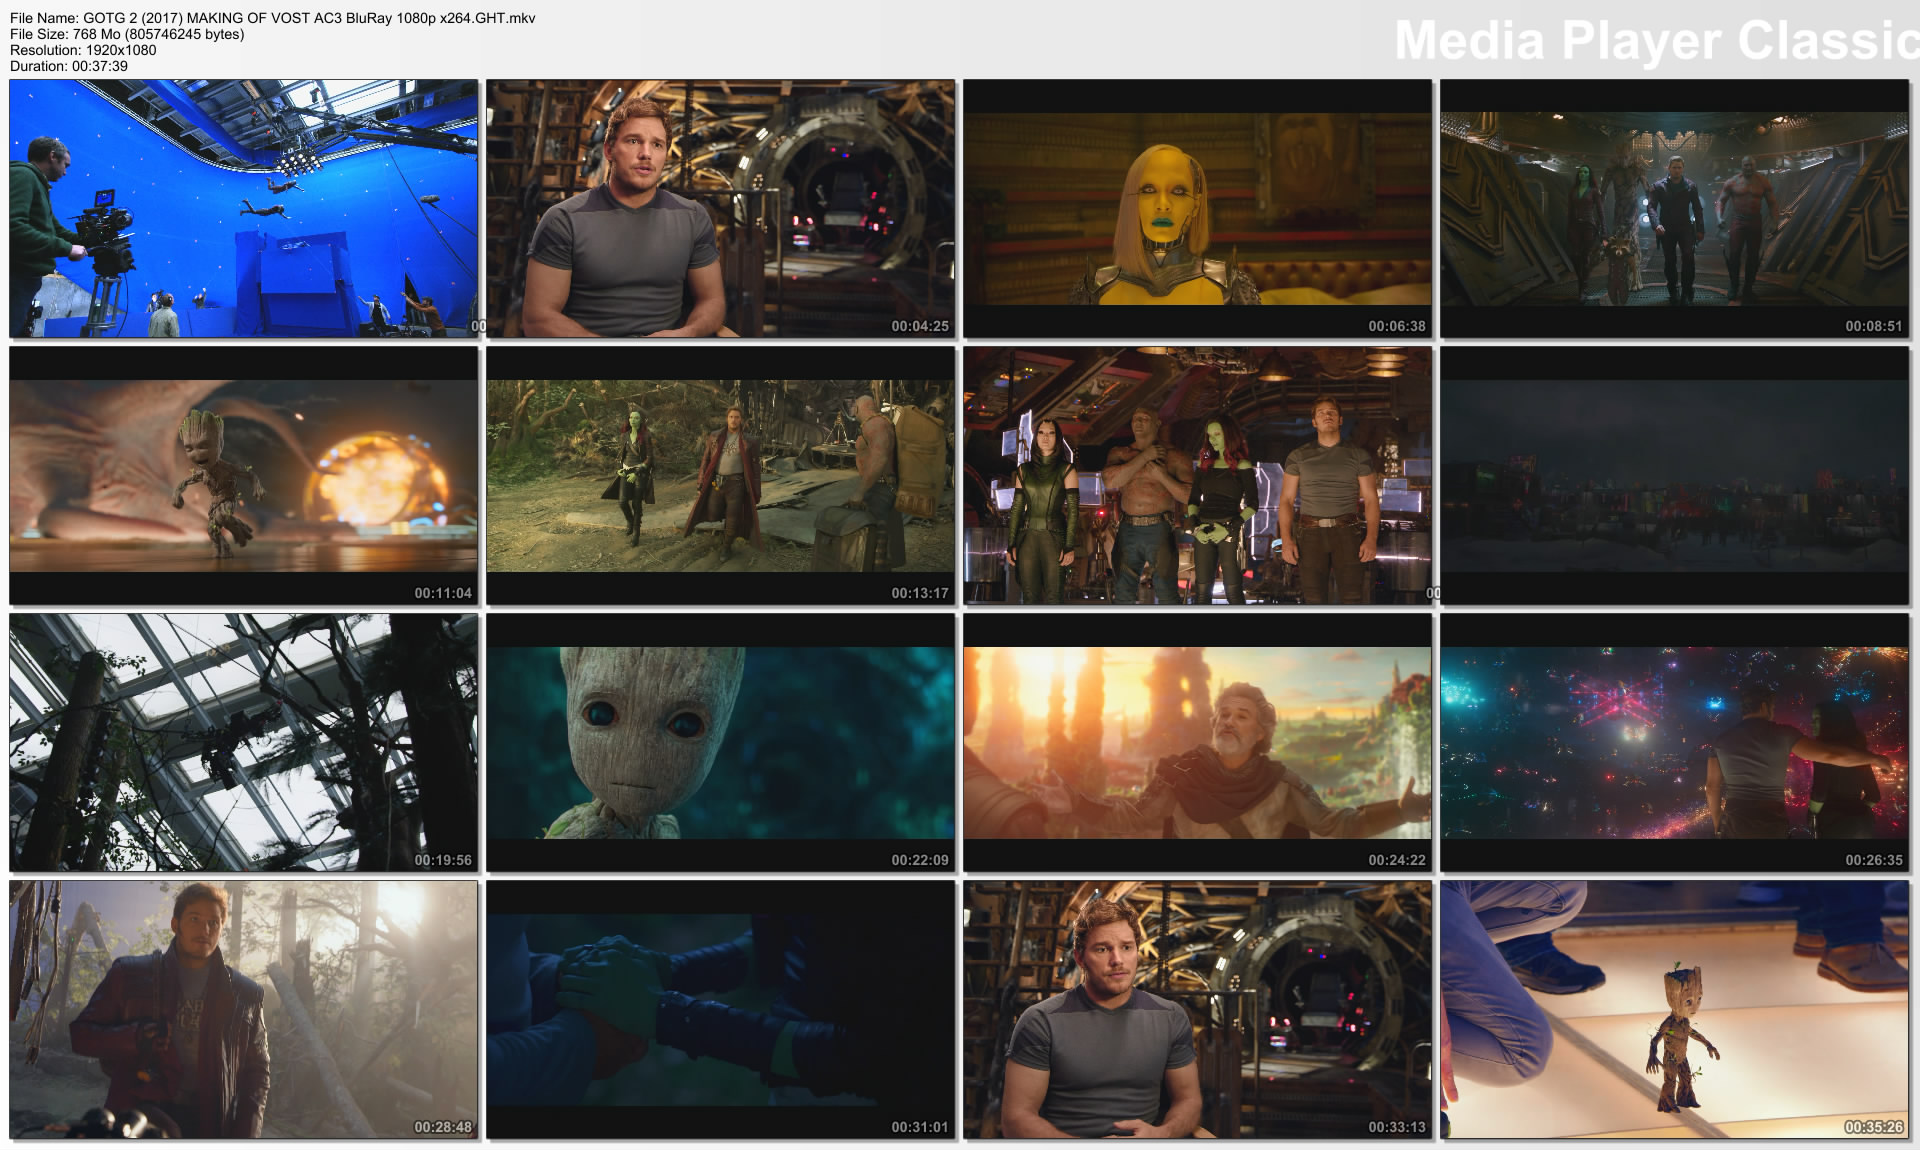 GOTG 2 (2017) MAKING OF VOST AC3 BluRay 1080p x264.GHT